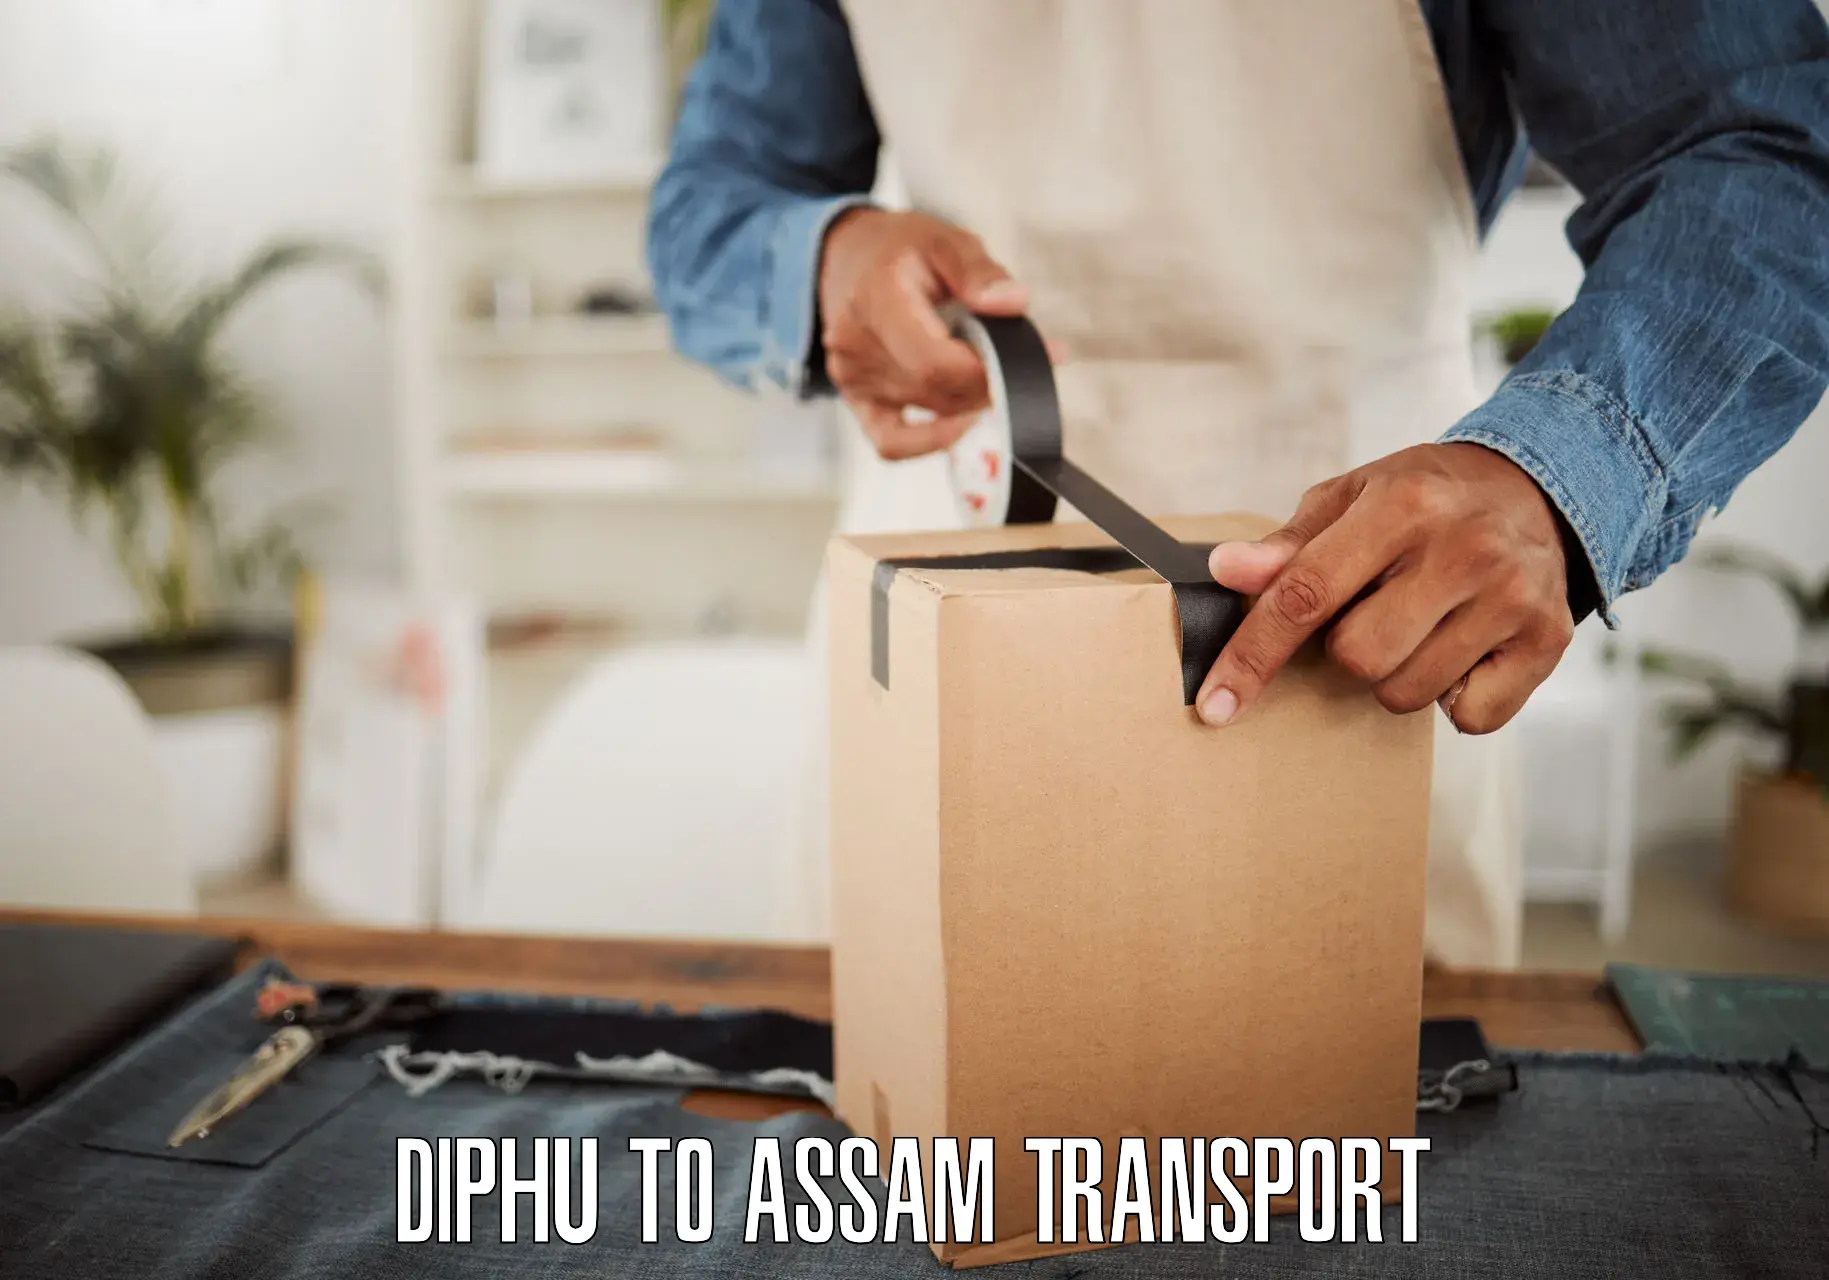 Vehicle transport services in Diphu to Diphu